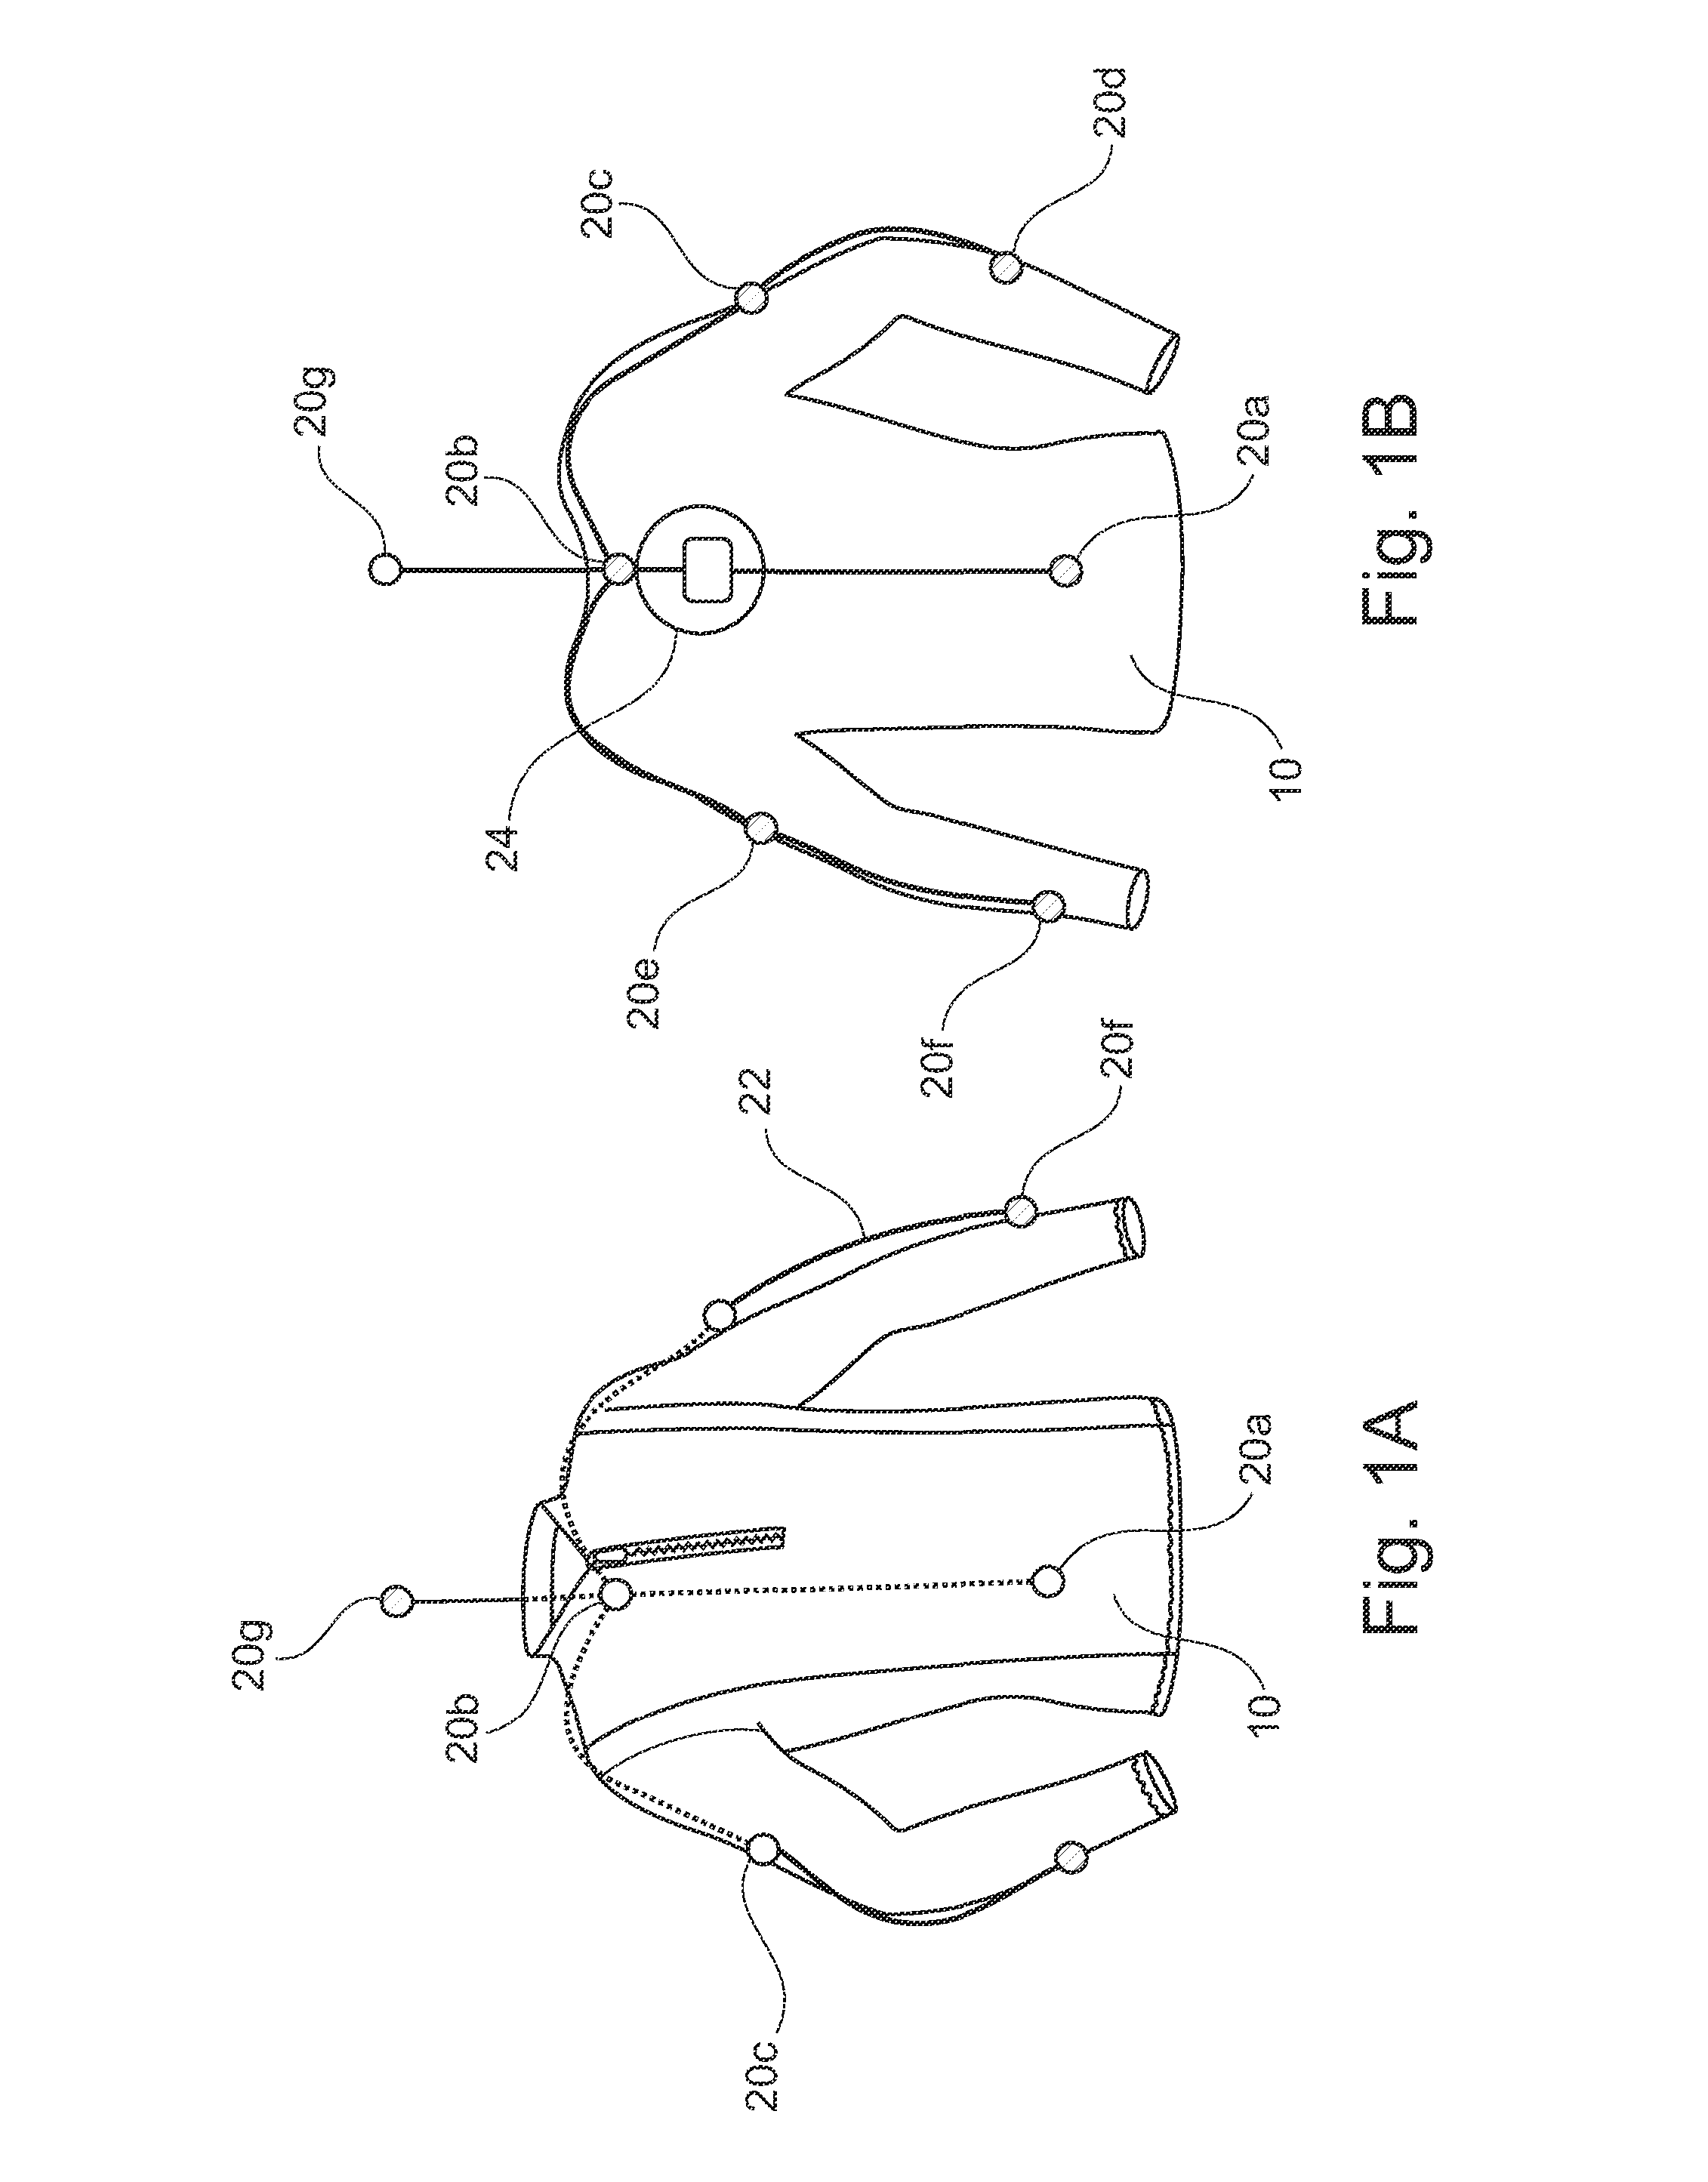 Method and apparatus for measuring expended energy